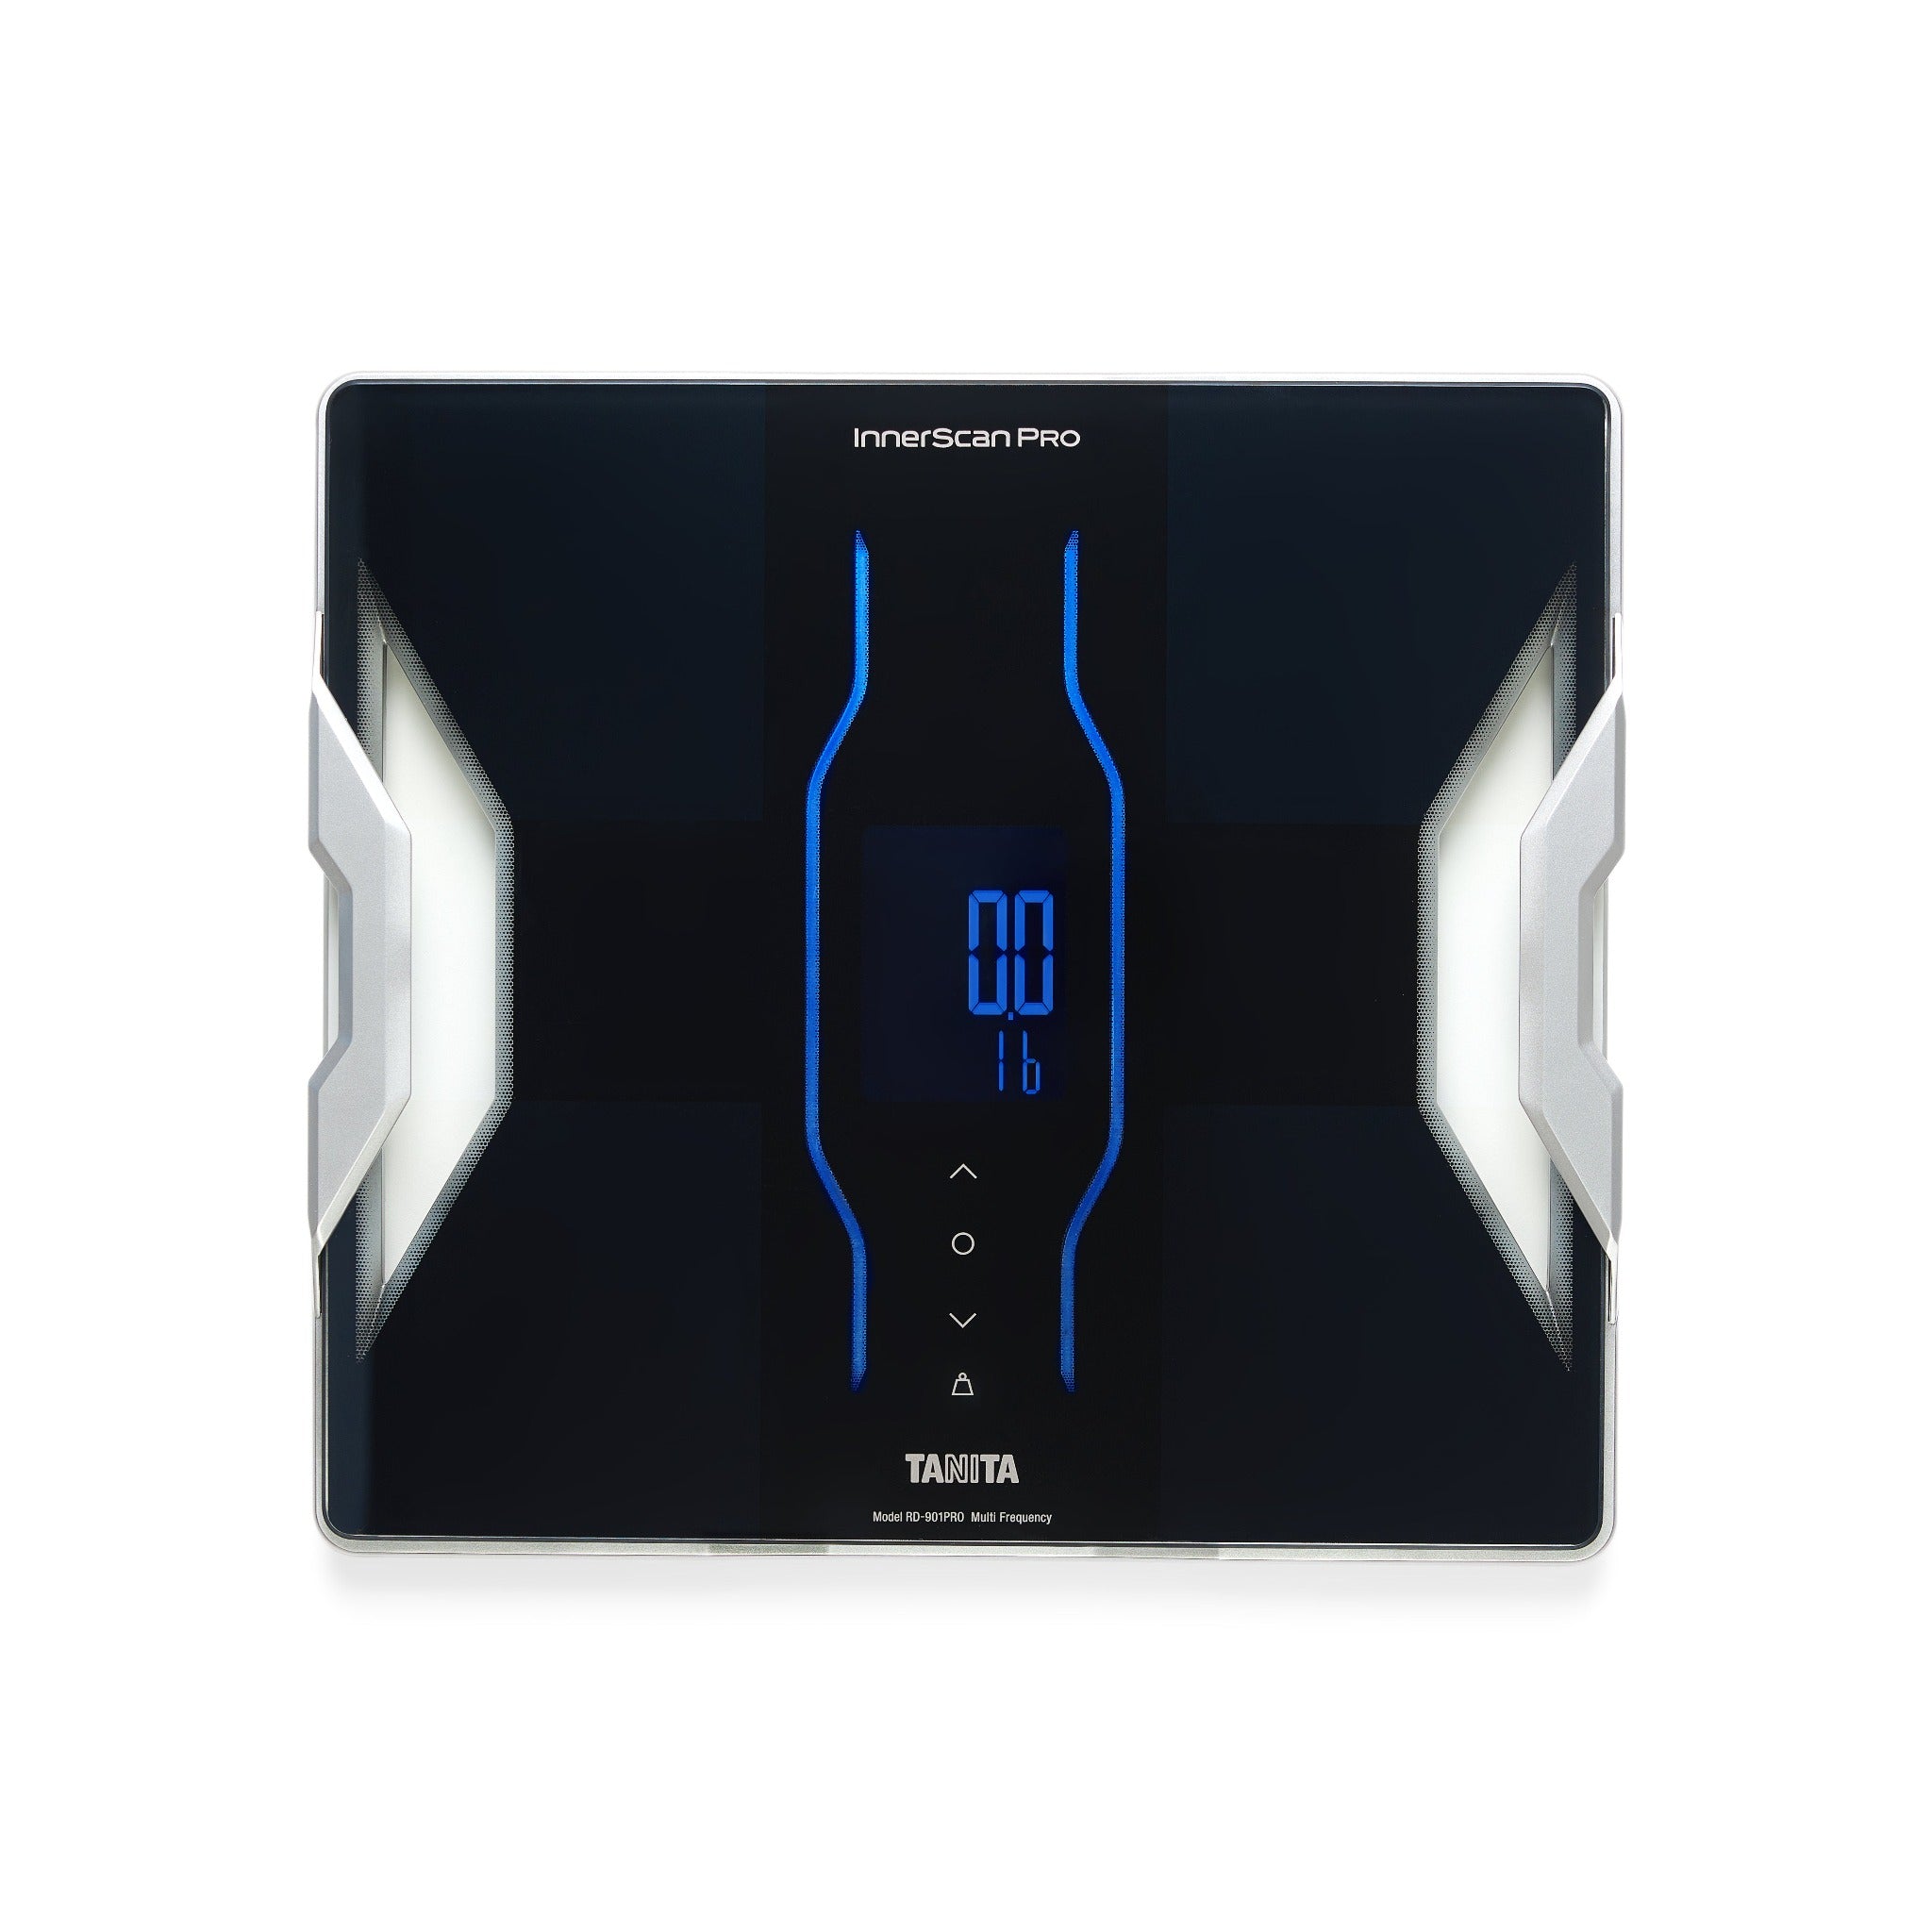 RD-901 InnerScan PRO Smart Body Composition Scale | Tanita